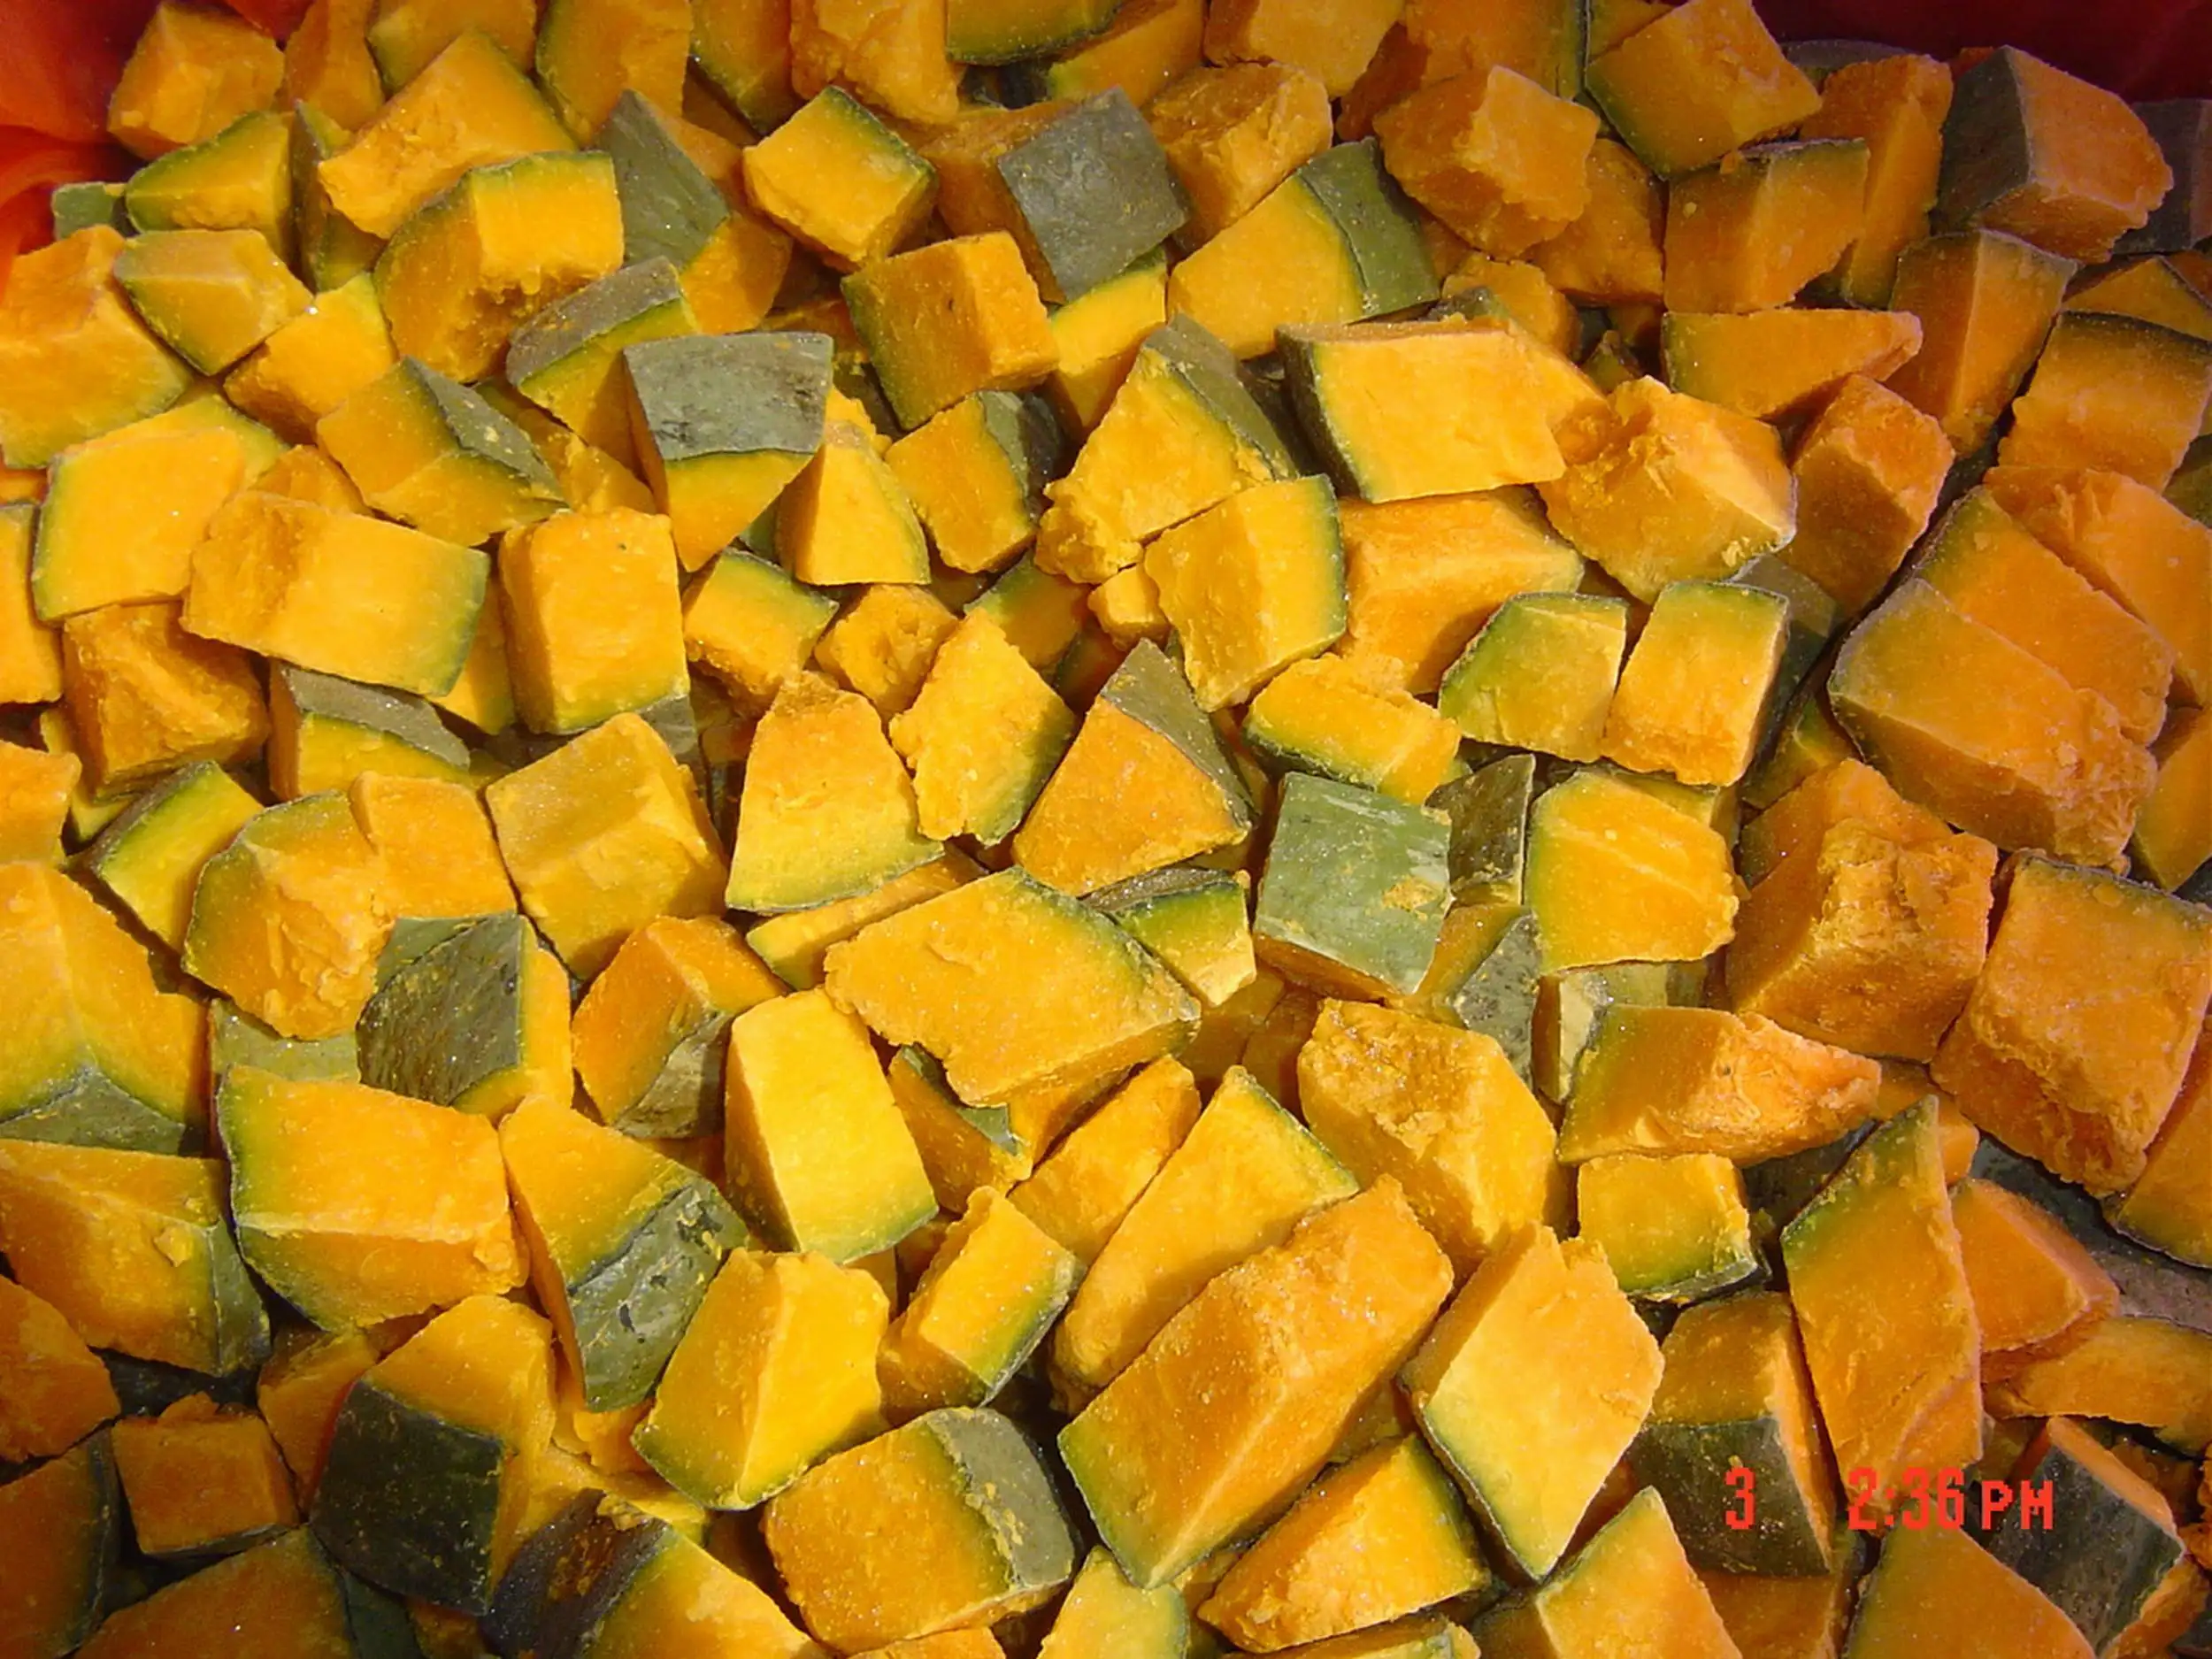 
TOP QUALITY! OFFER VIETNAMESE FROZEN PUMPKIN WITH HIGH QUALITY AND BEST PRICE in 2020 